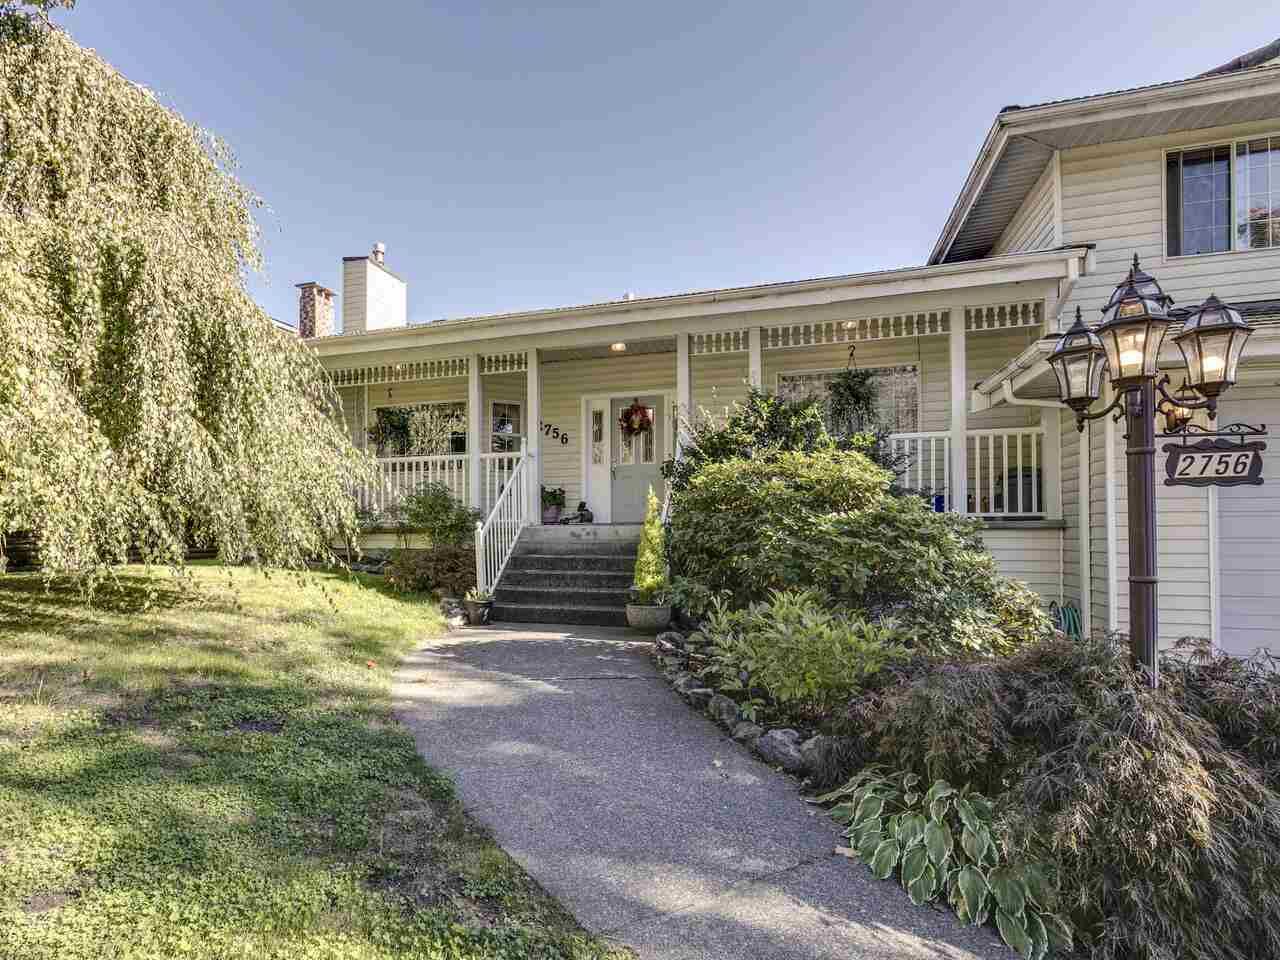 Main Photo: 2756 CAMROSE Drive in Burnaby: Montecito House for sale (Burnaby North)  : MLS®# R2515218